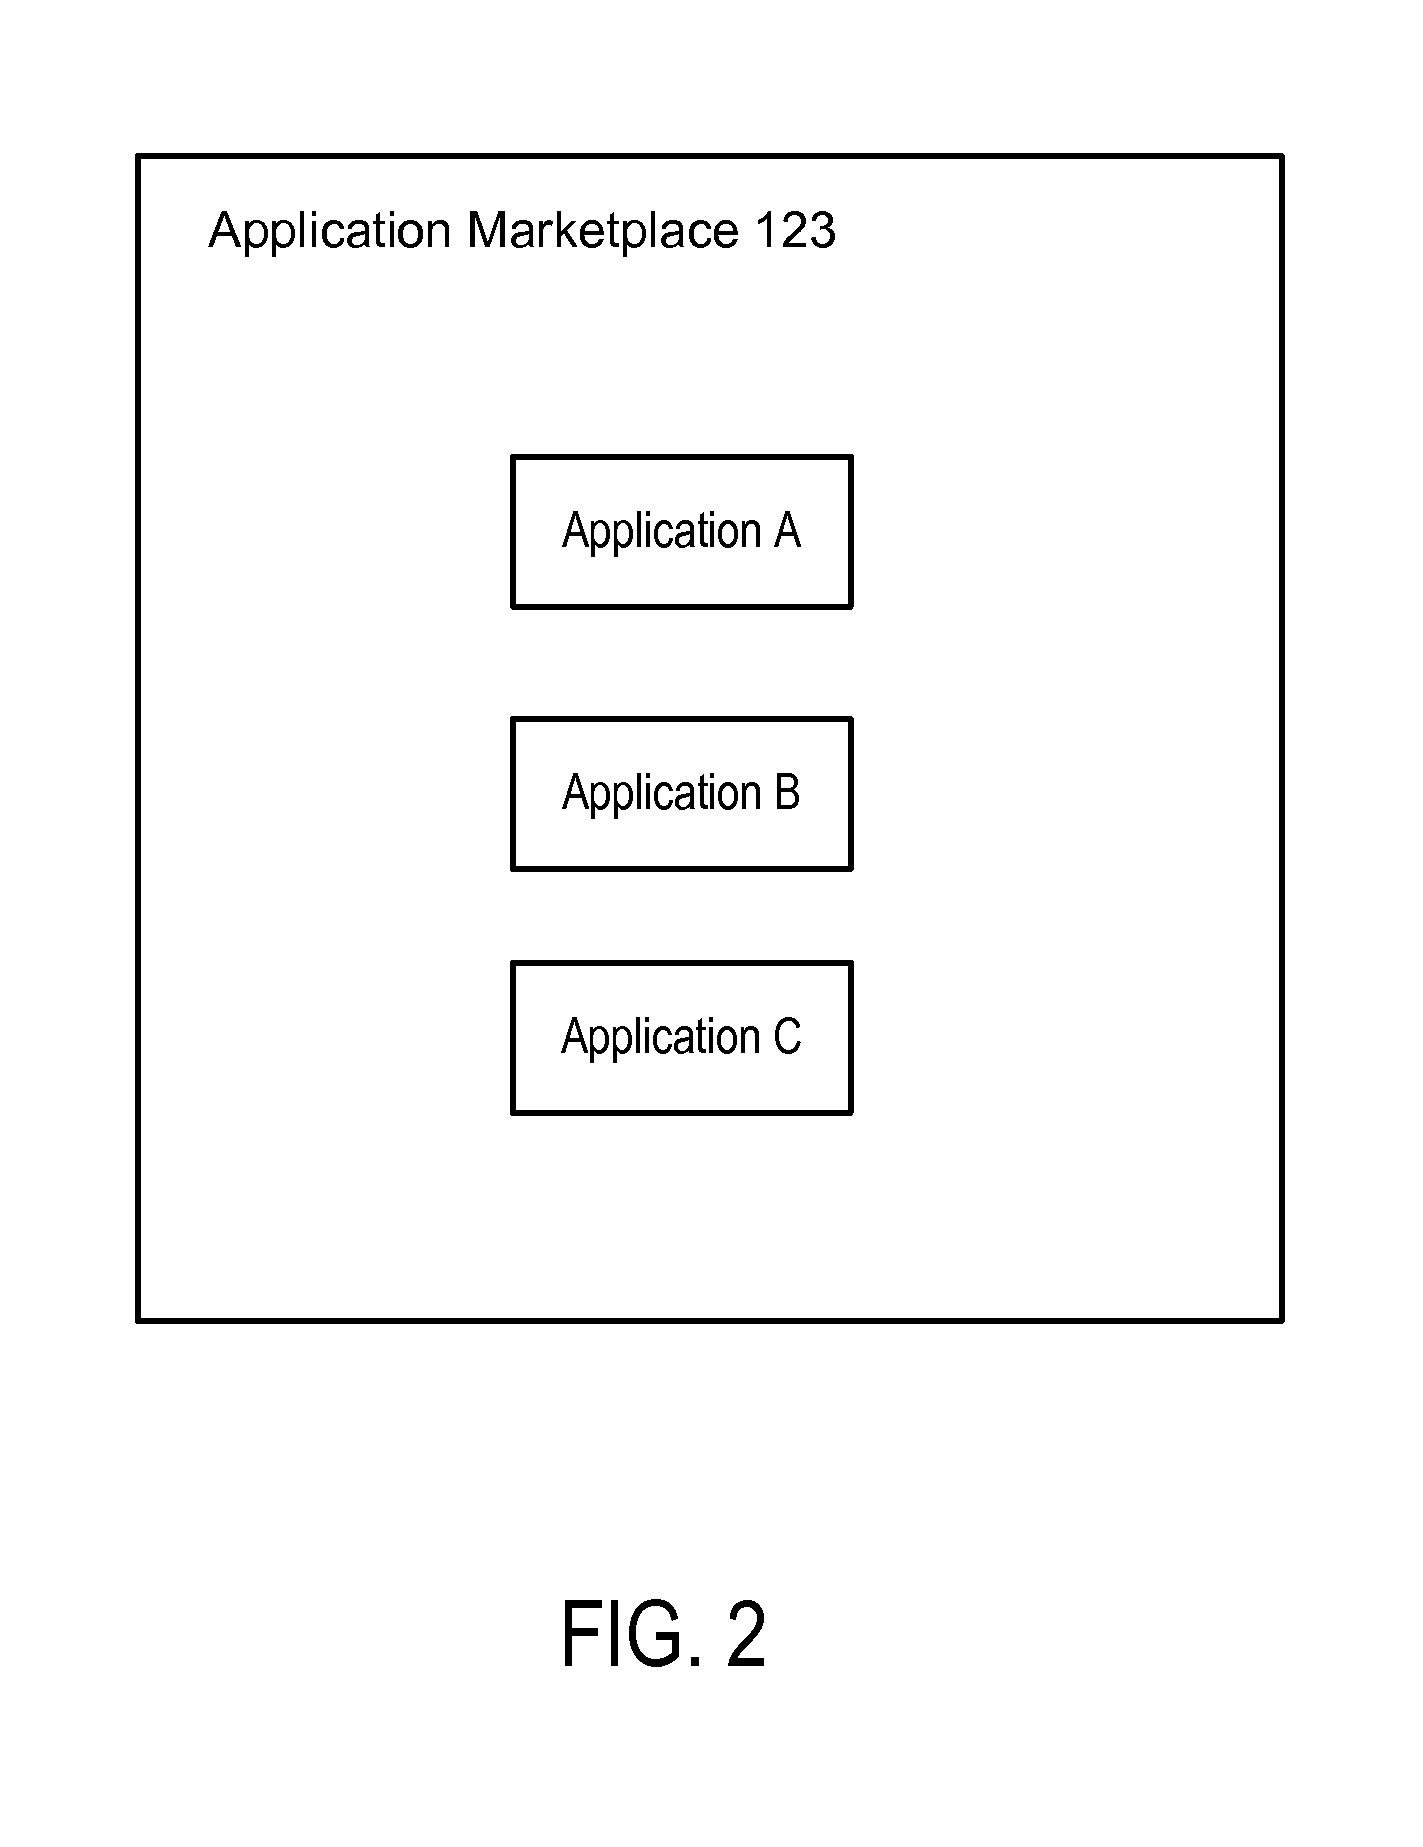 Remote Application Installation and Control for a Mobile Device